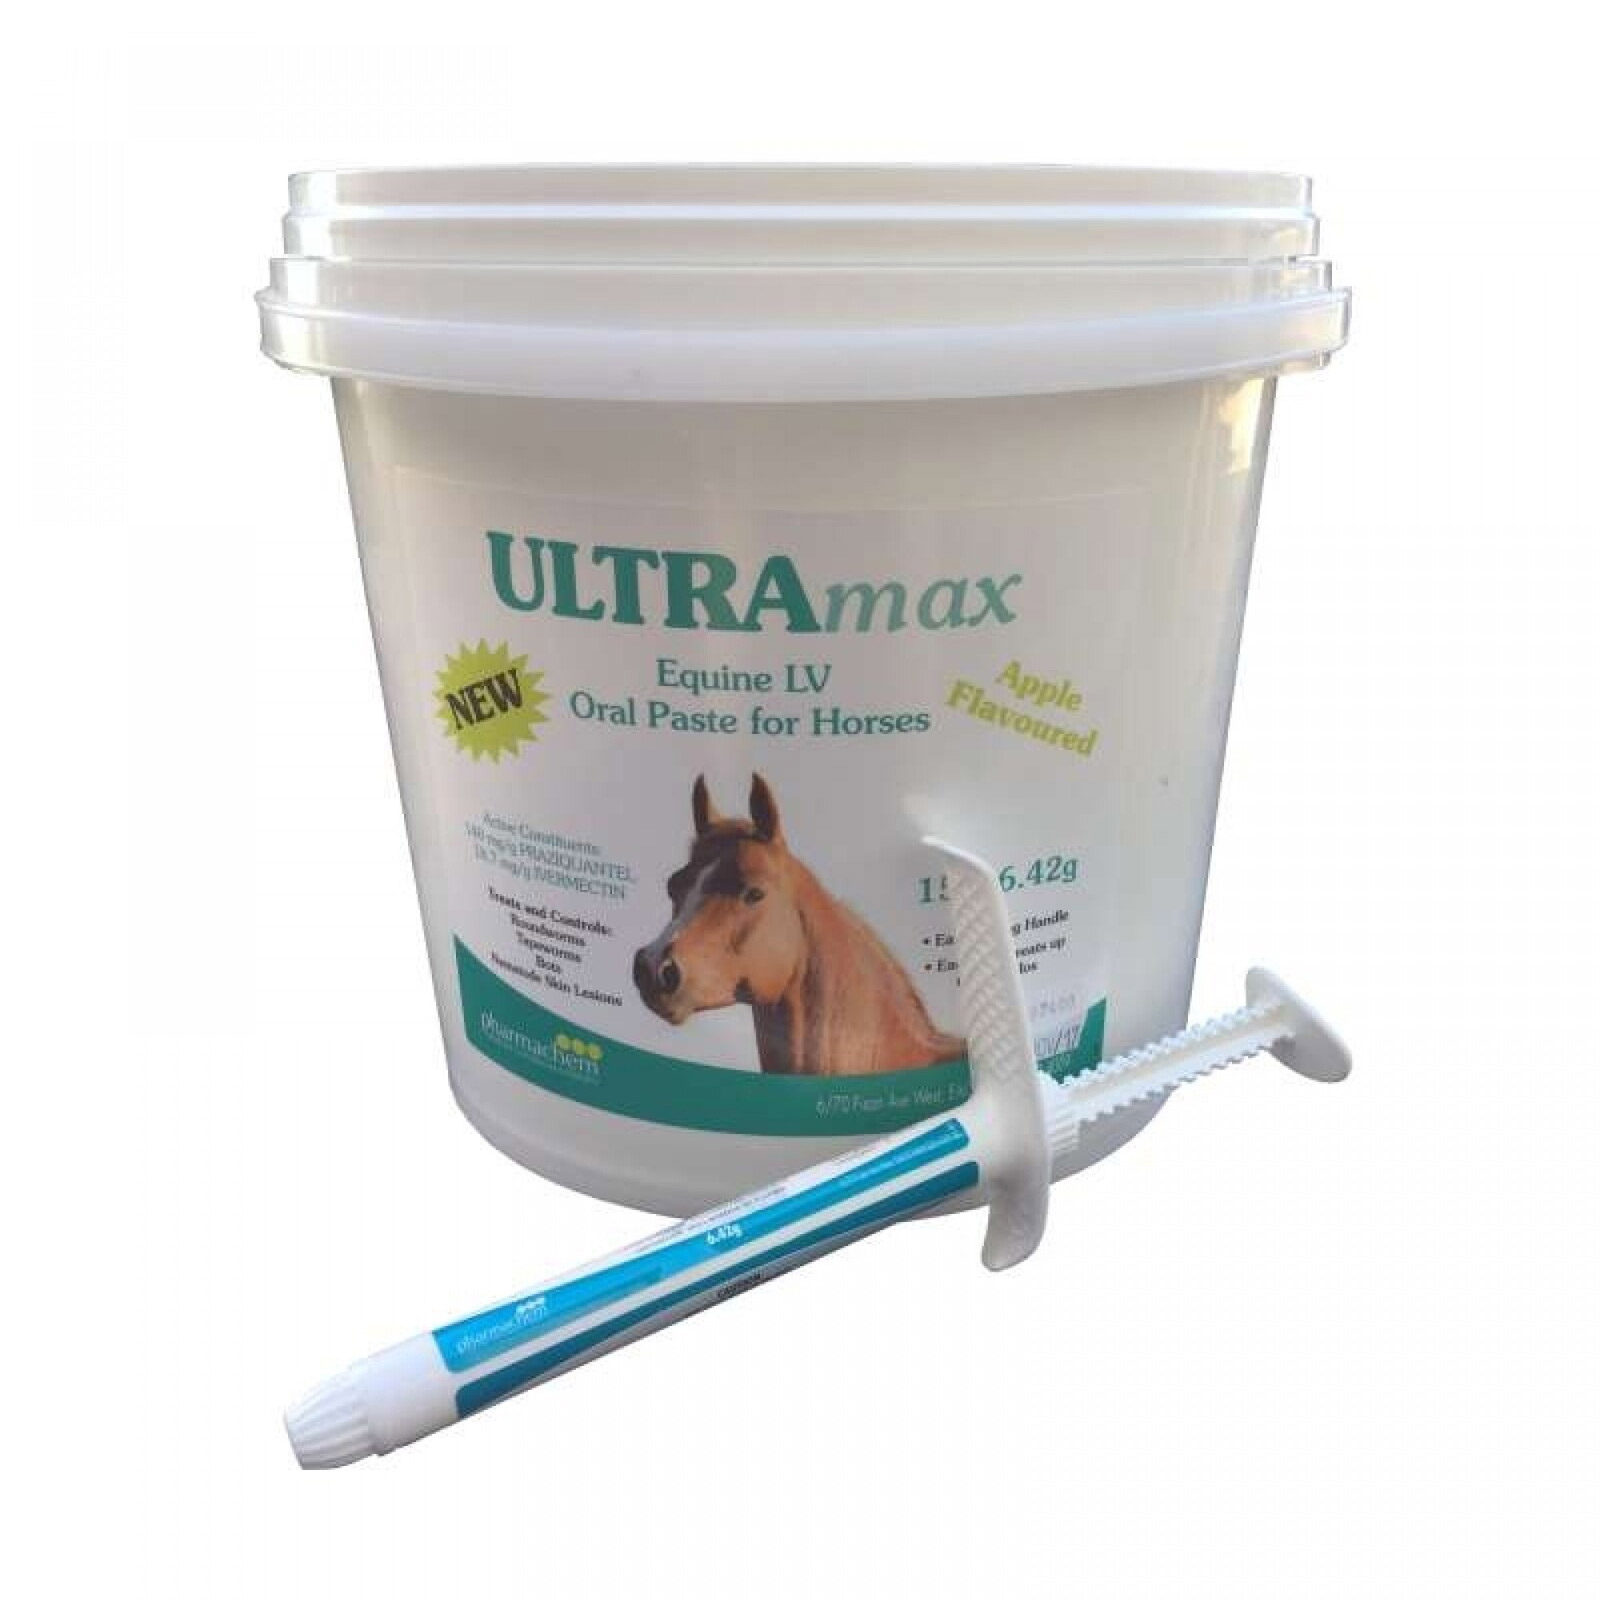 Ultramax Equine for Horse